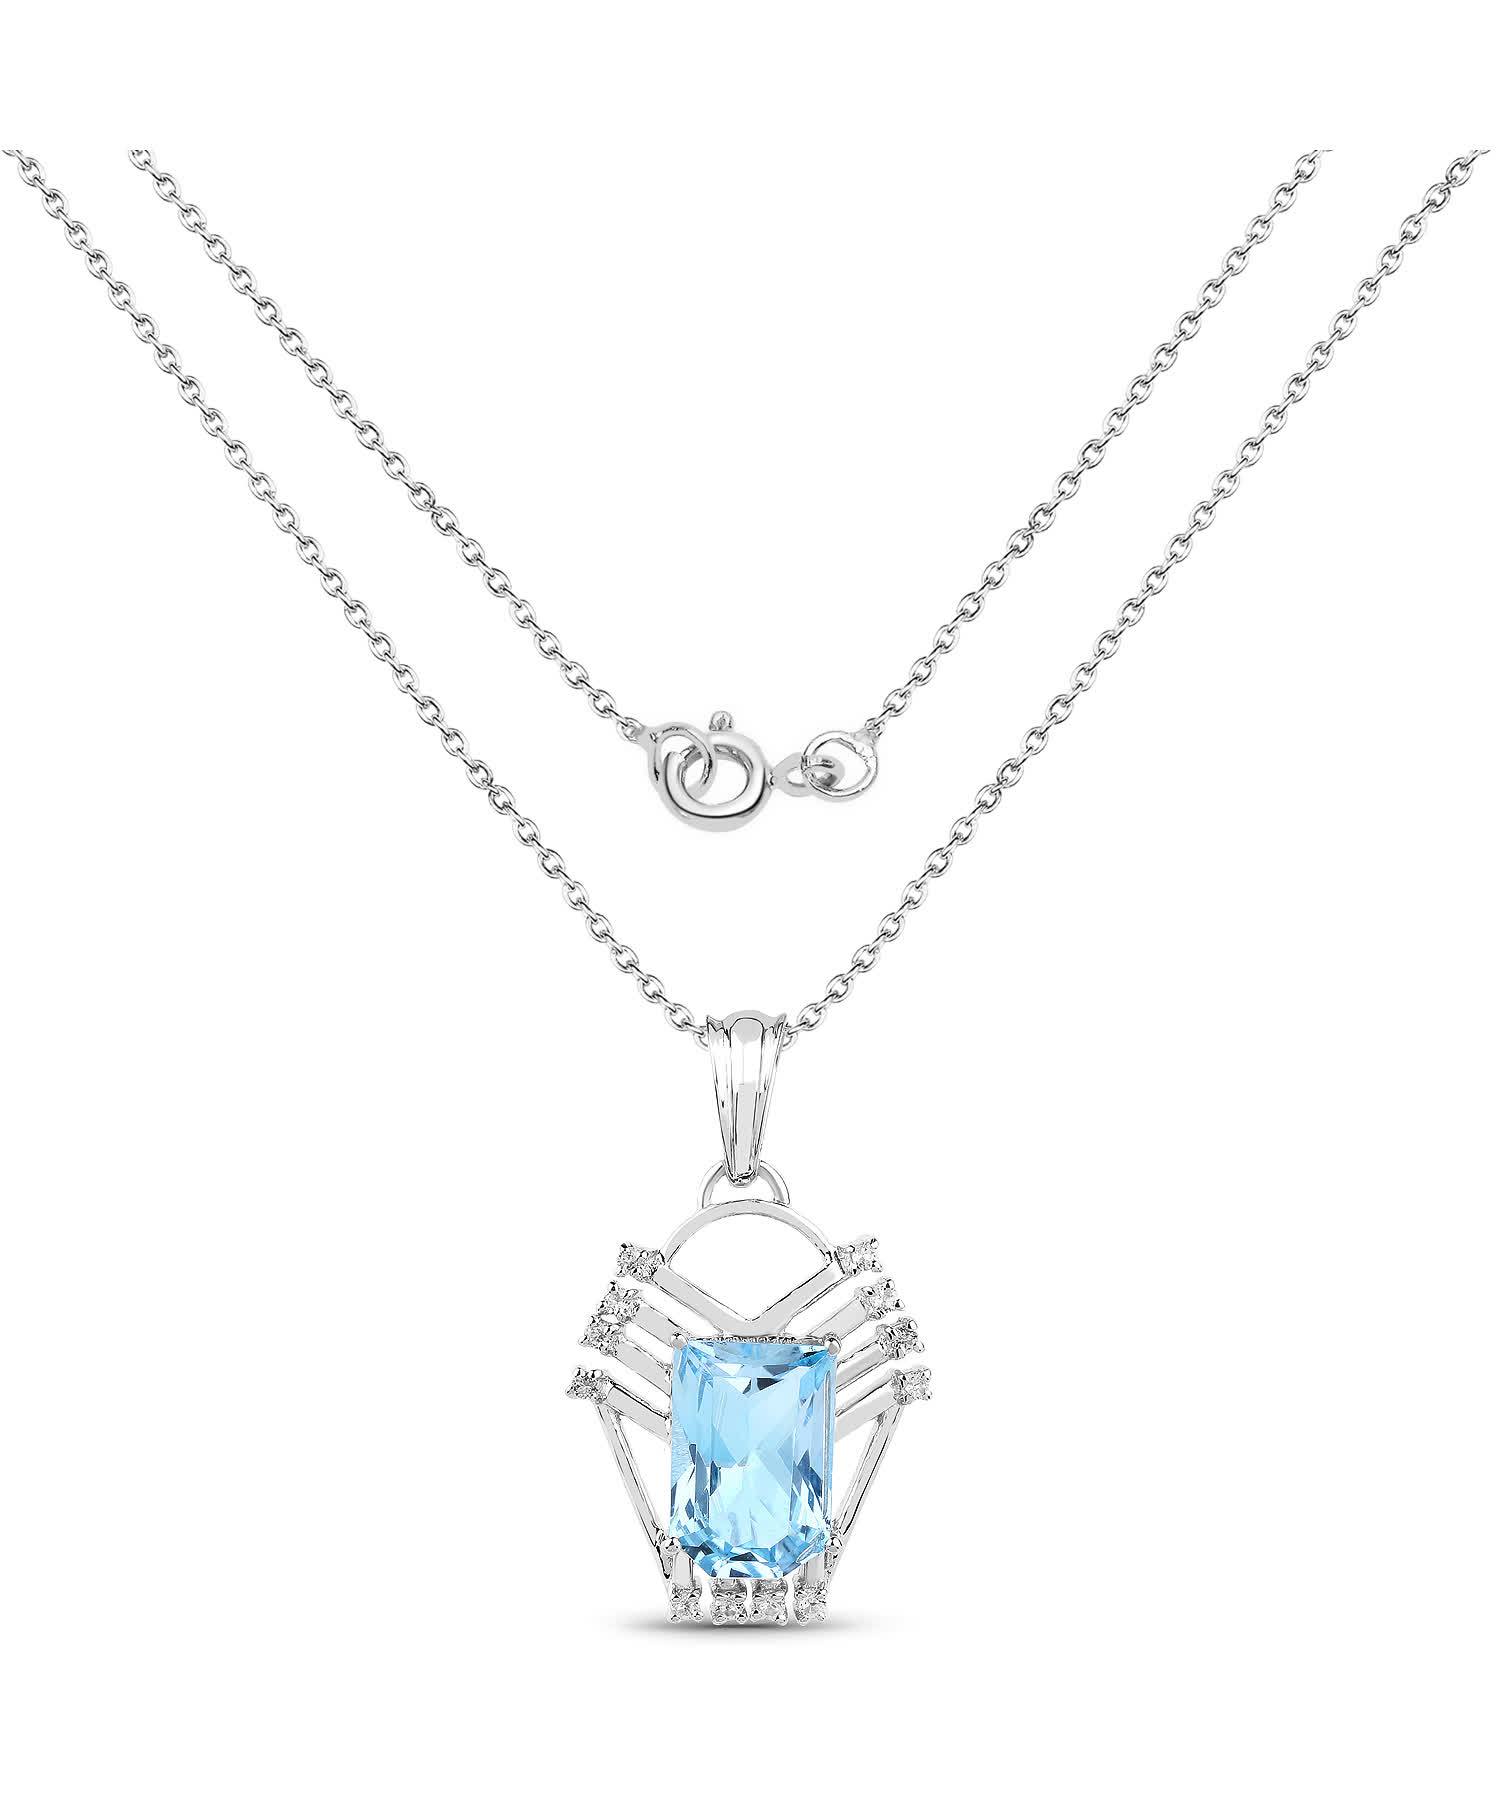 5.76ctw Natural Swiss Blue Topaz Rhodium Plated 925 Sterling Silver Pendant With Chain View 2